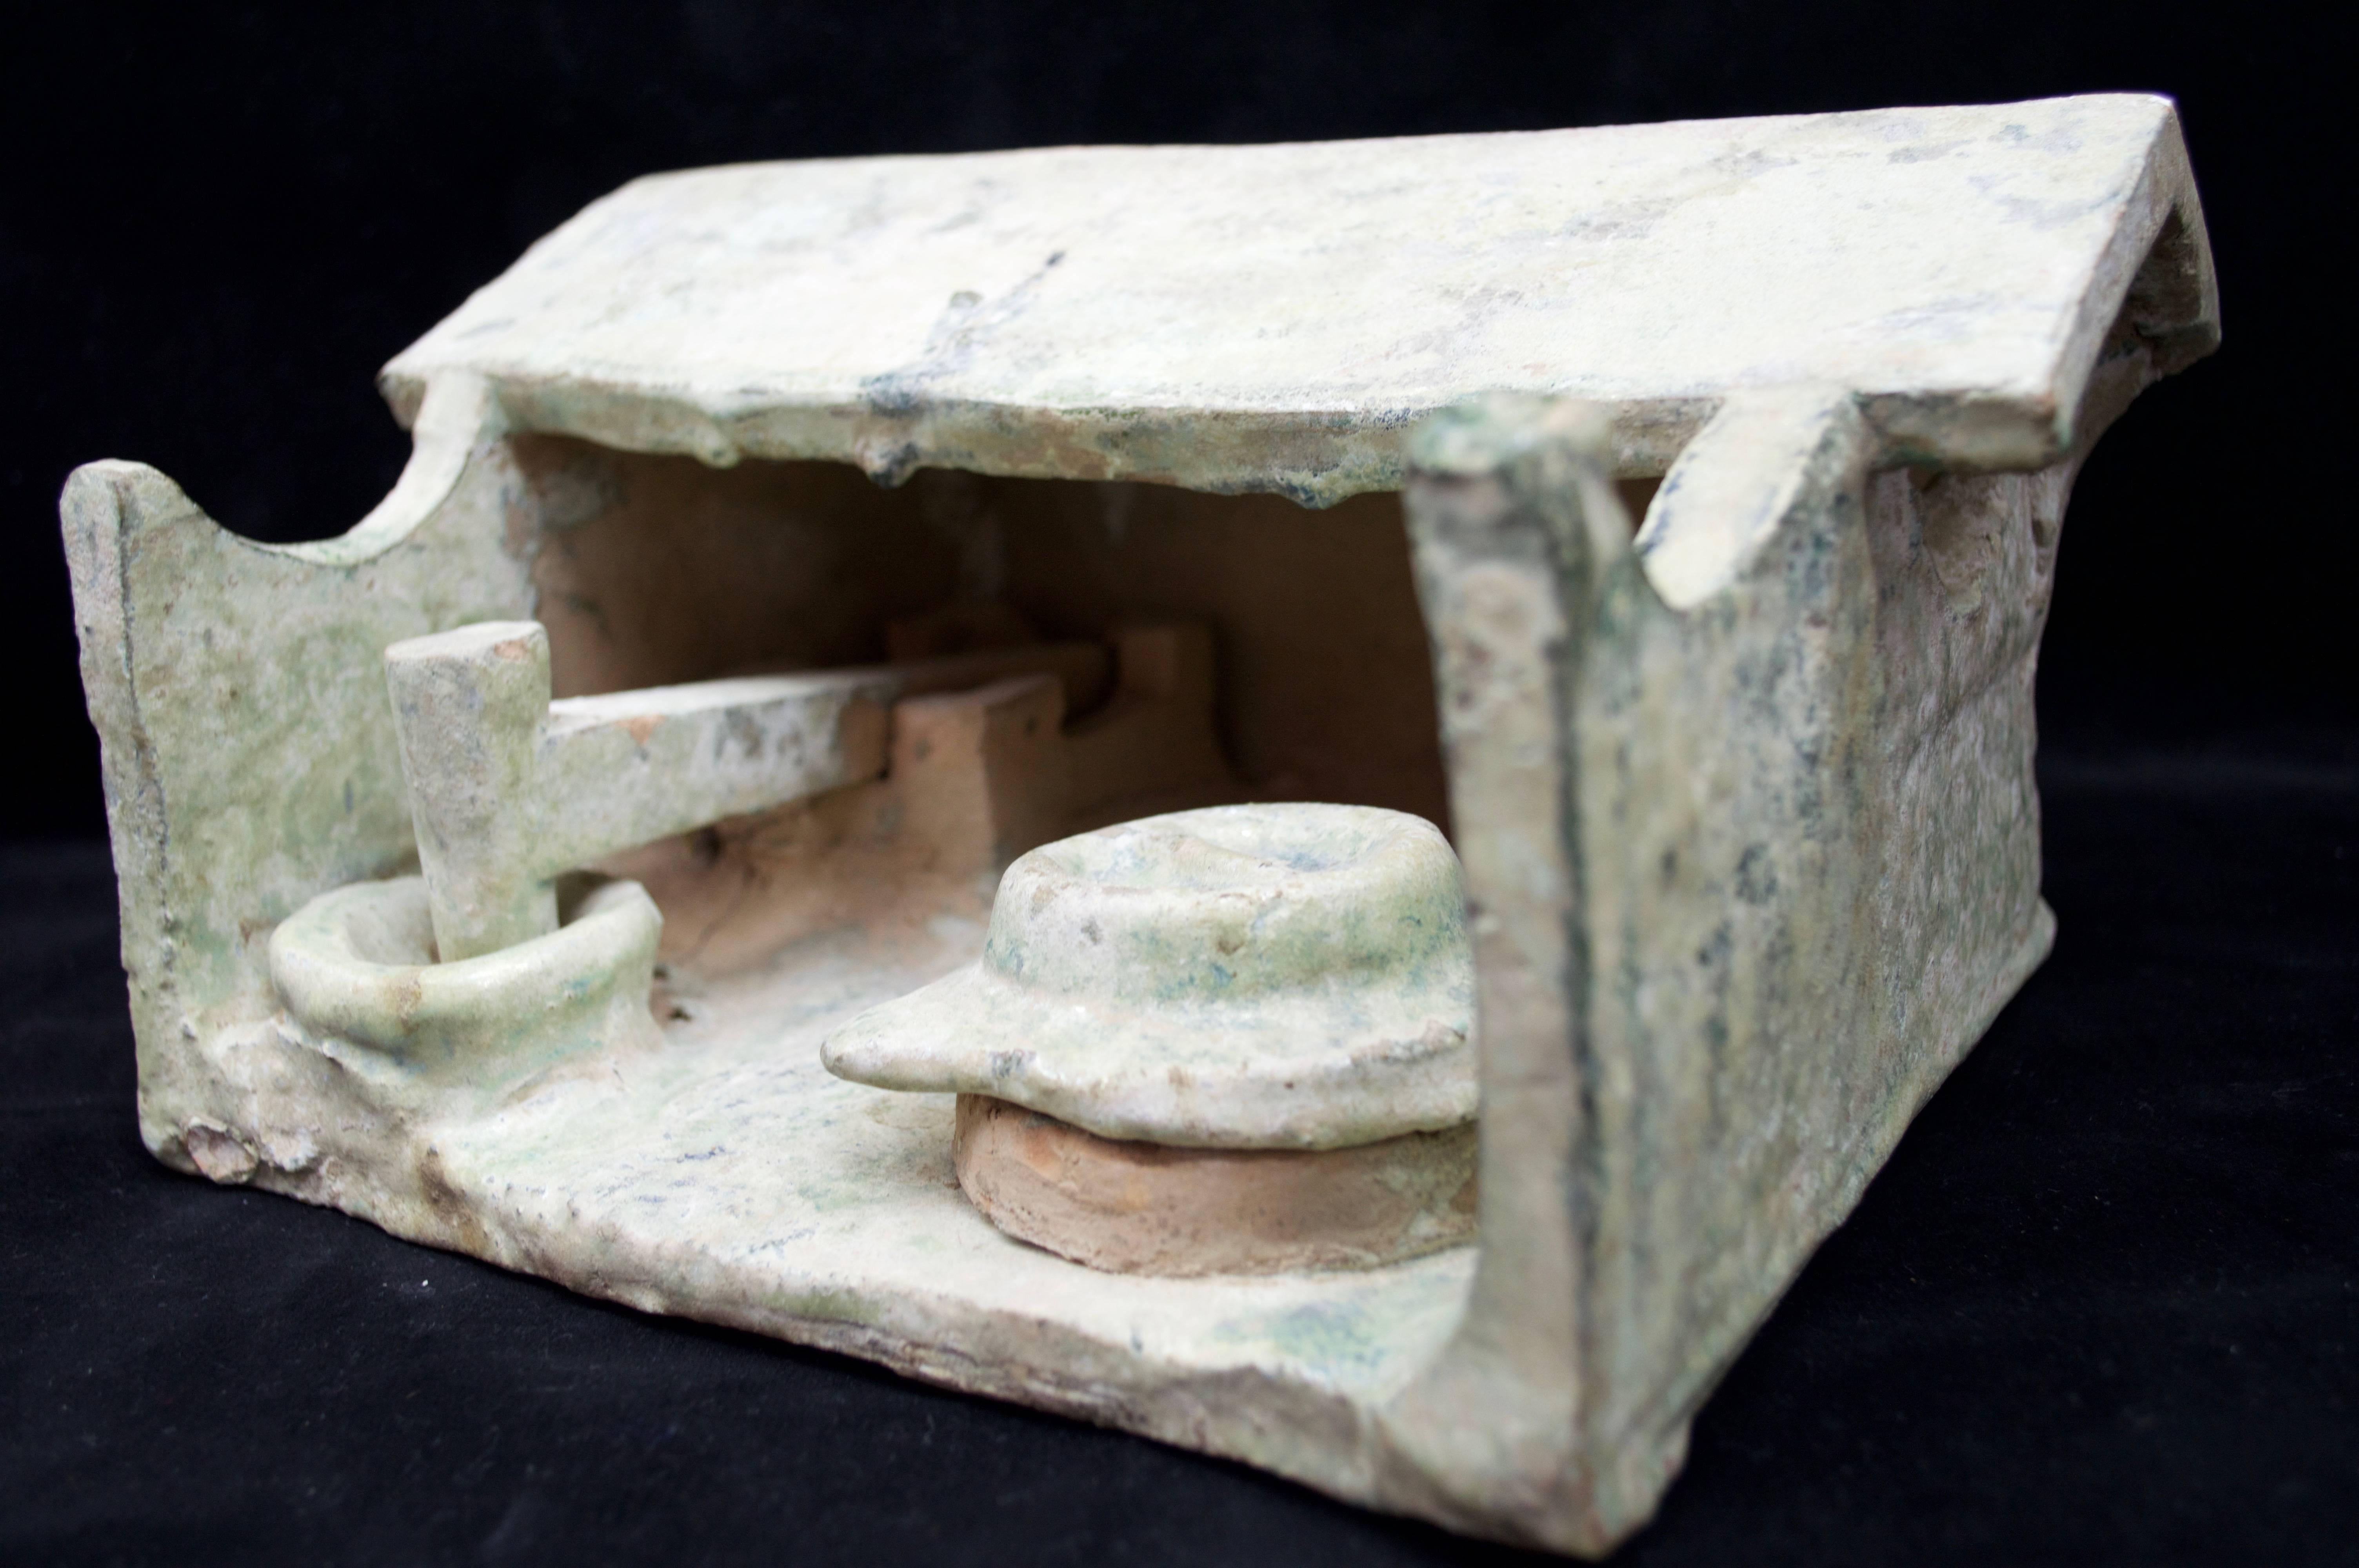 Slab pottery constructed barn workshop having a peaked roof – open walled form with a mechanical pounder and a large round covered storage container. Light blue-green mottled glazed surface with some iridescence patina to the glaze. 

Condition: